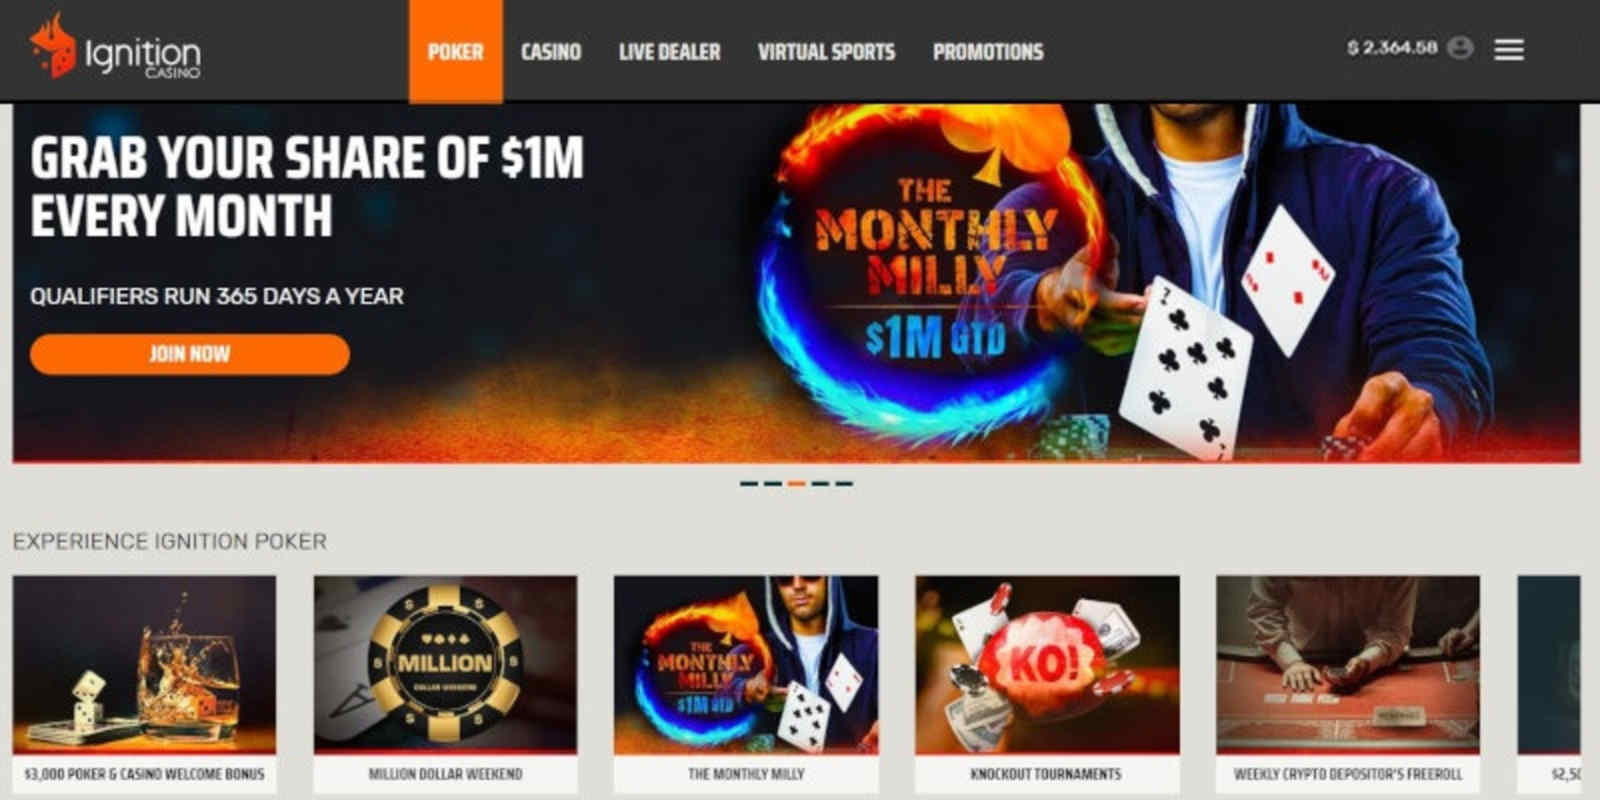 Master Your Online Bitcoin Casino in 5 Minutes A Day